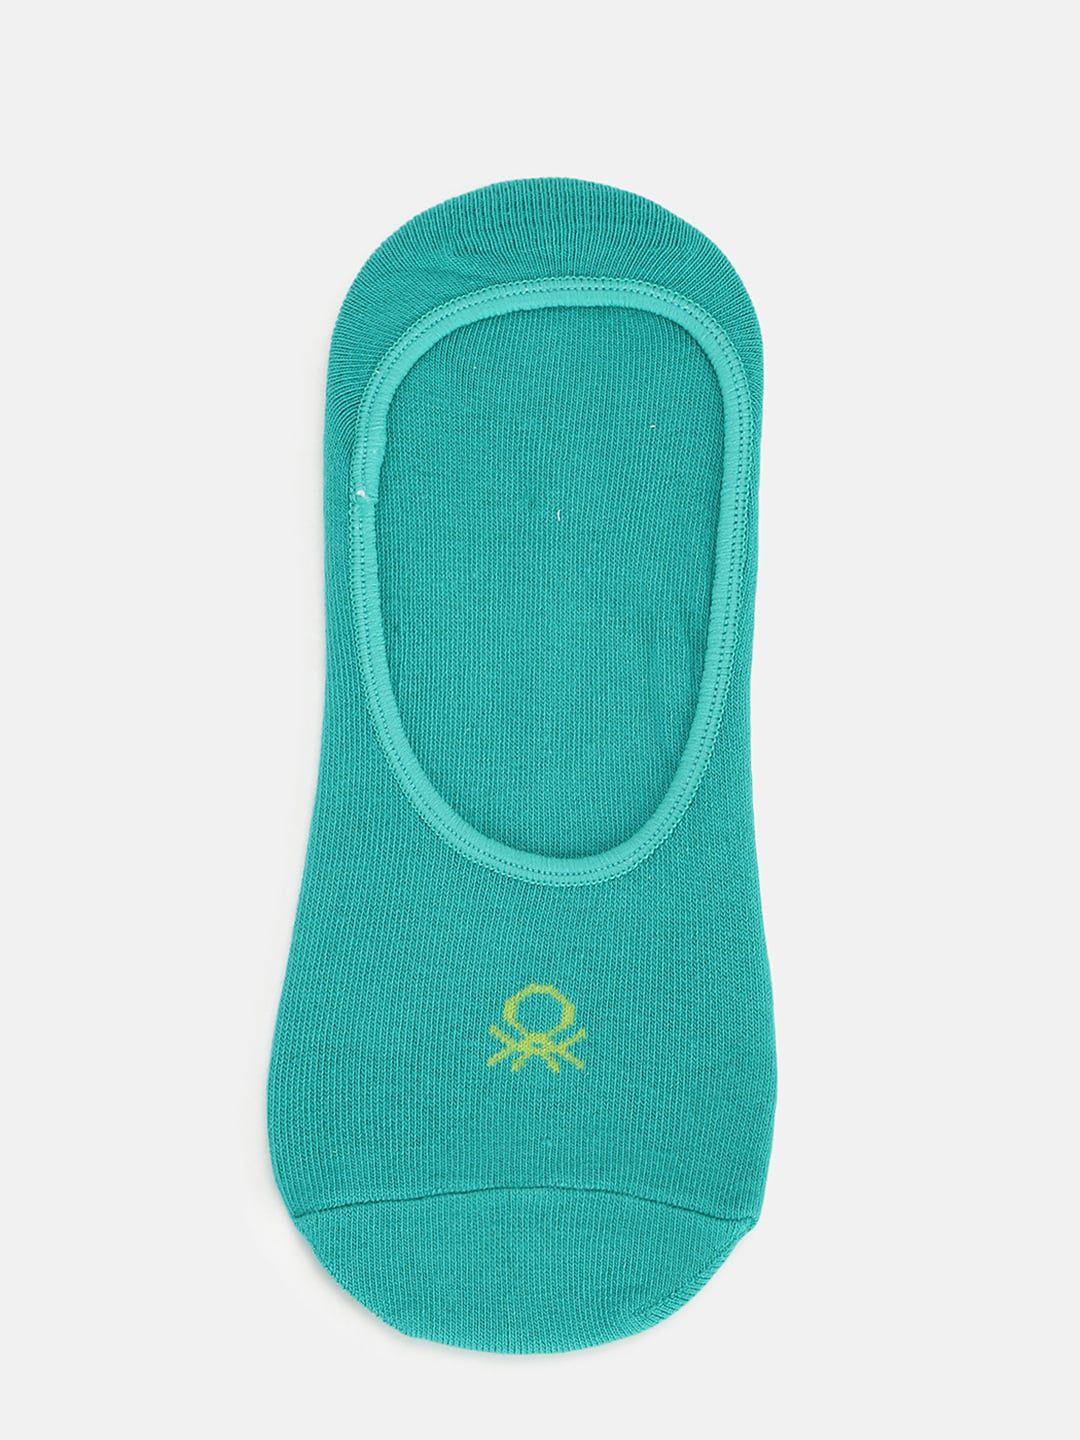 united colors of benetton brand logo printed comfortable shoe liners